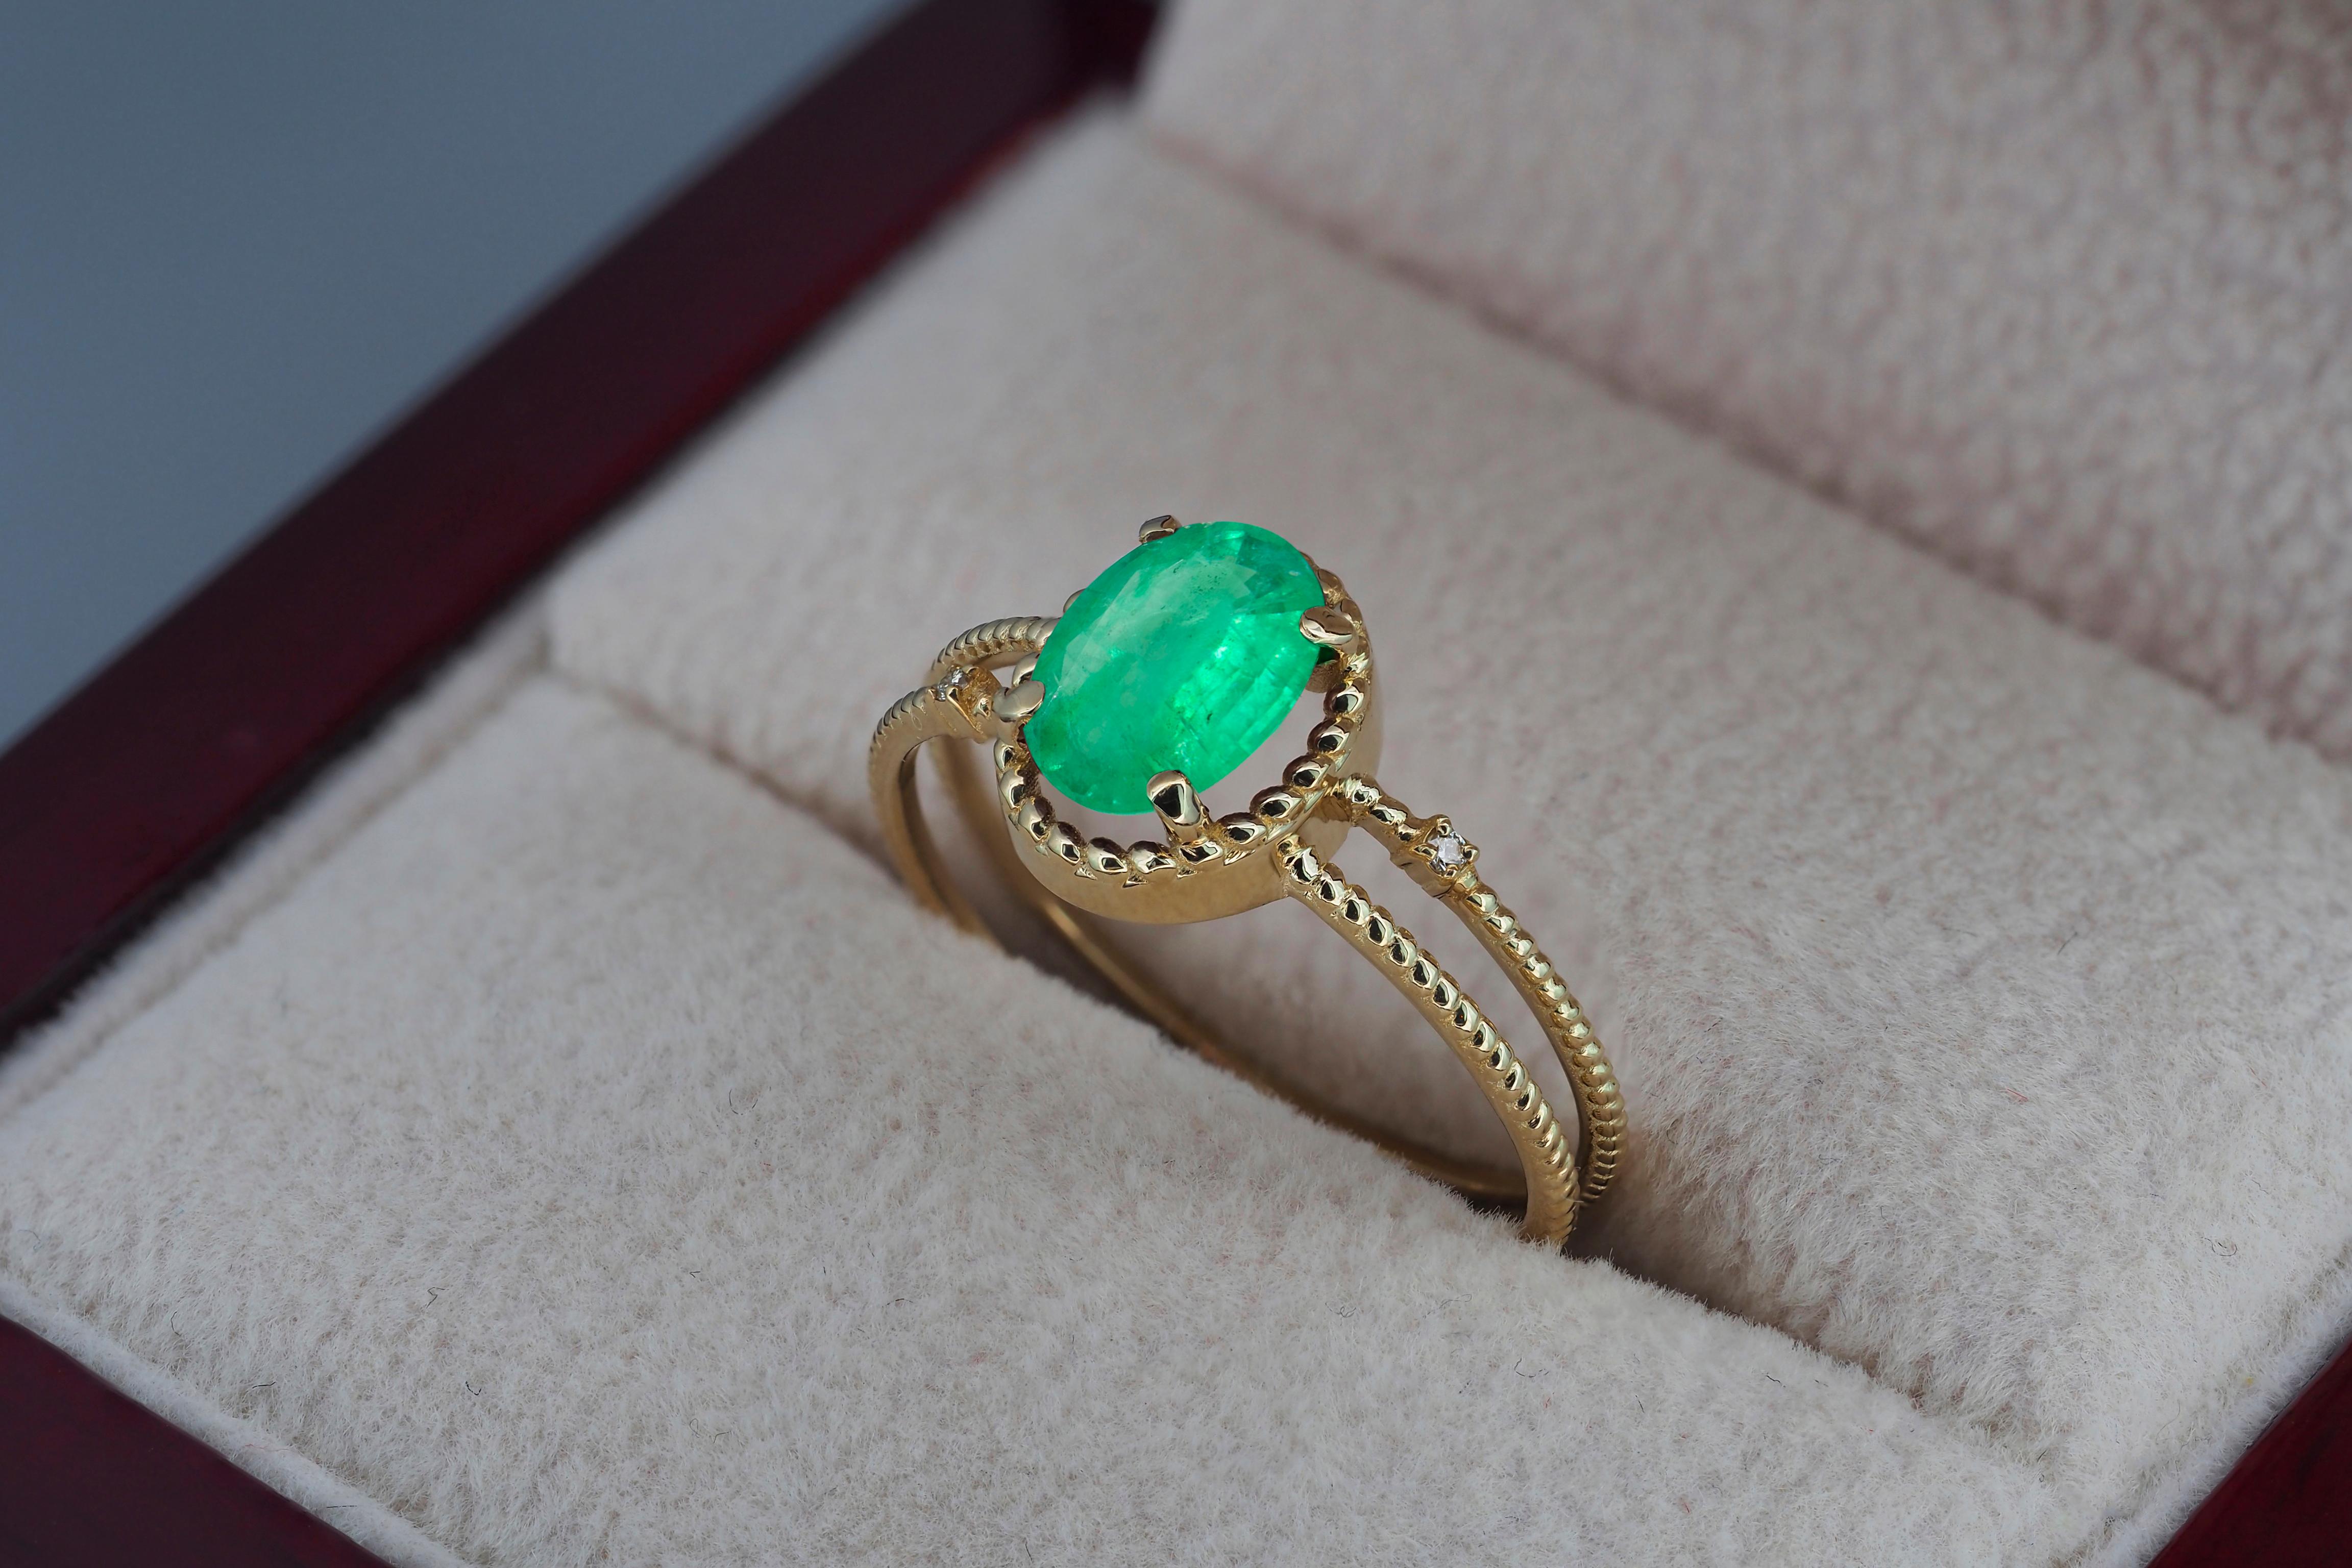 For Sale:  Emerald Gold Ring, Oval Emerald Ring, 14k Gold Ring with Emerald 5